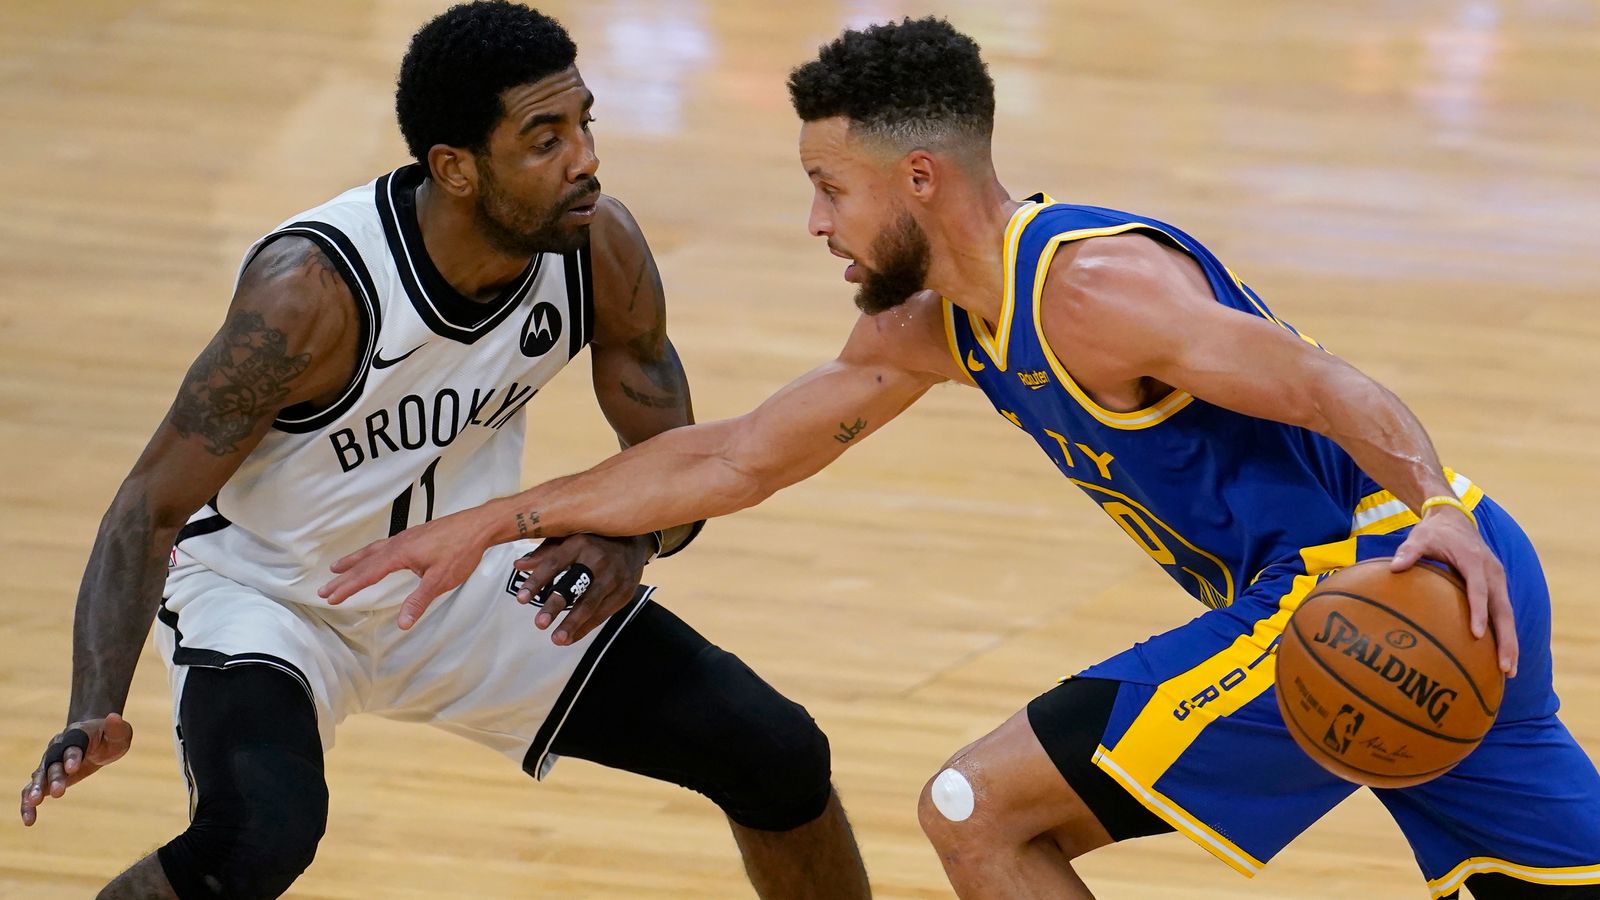 Stephen Curry on Kyrie Irving: We bring 'best out of each other